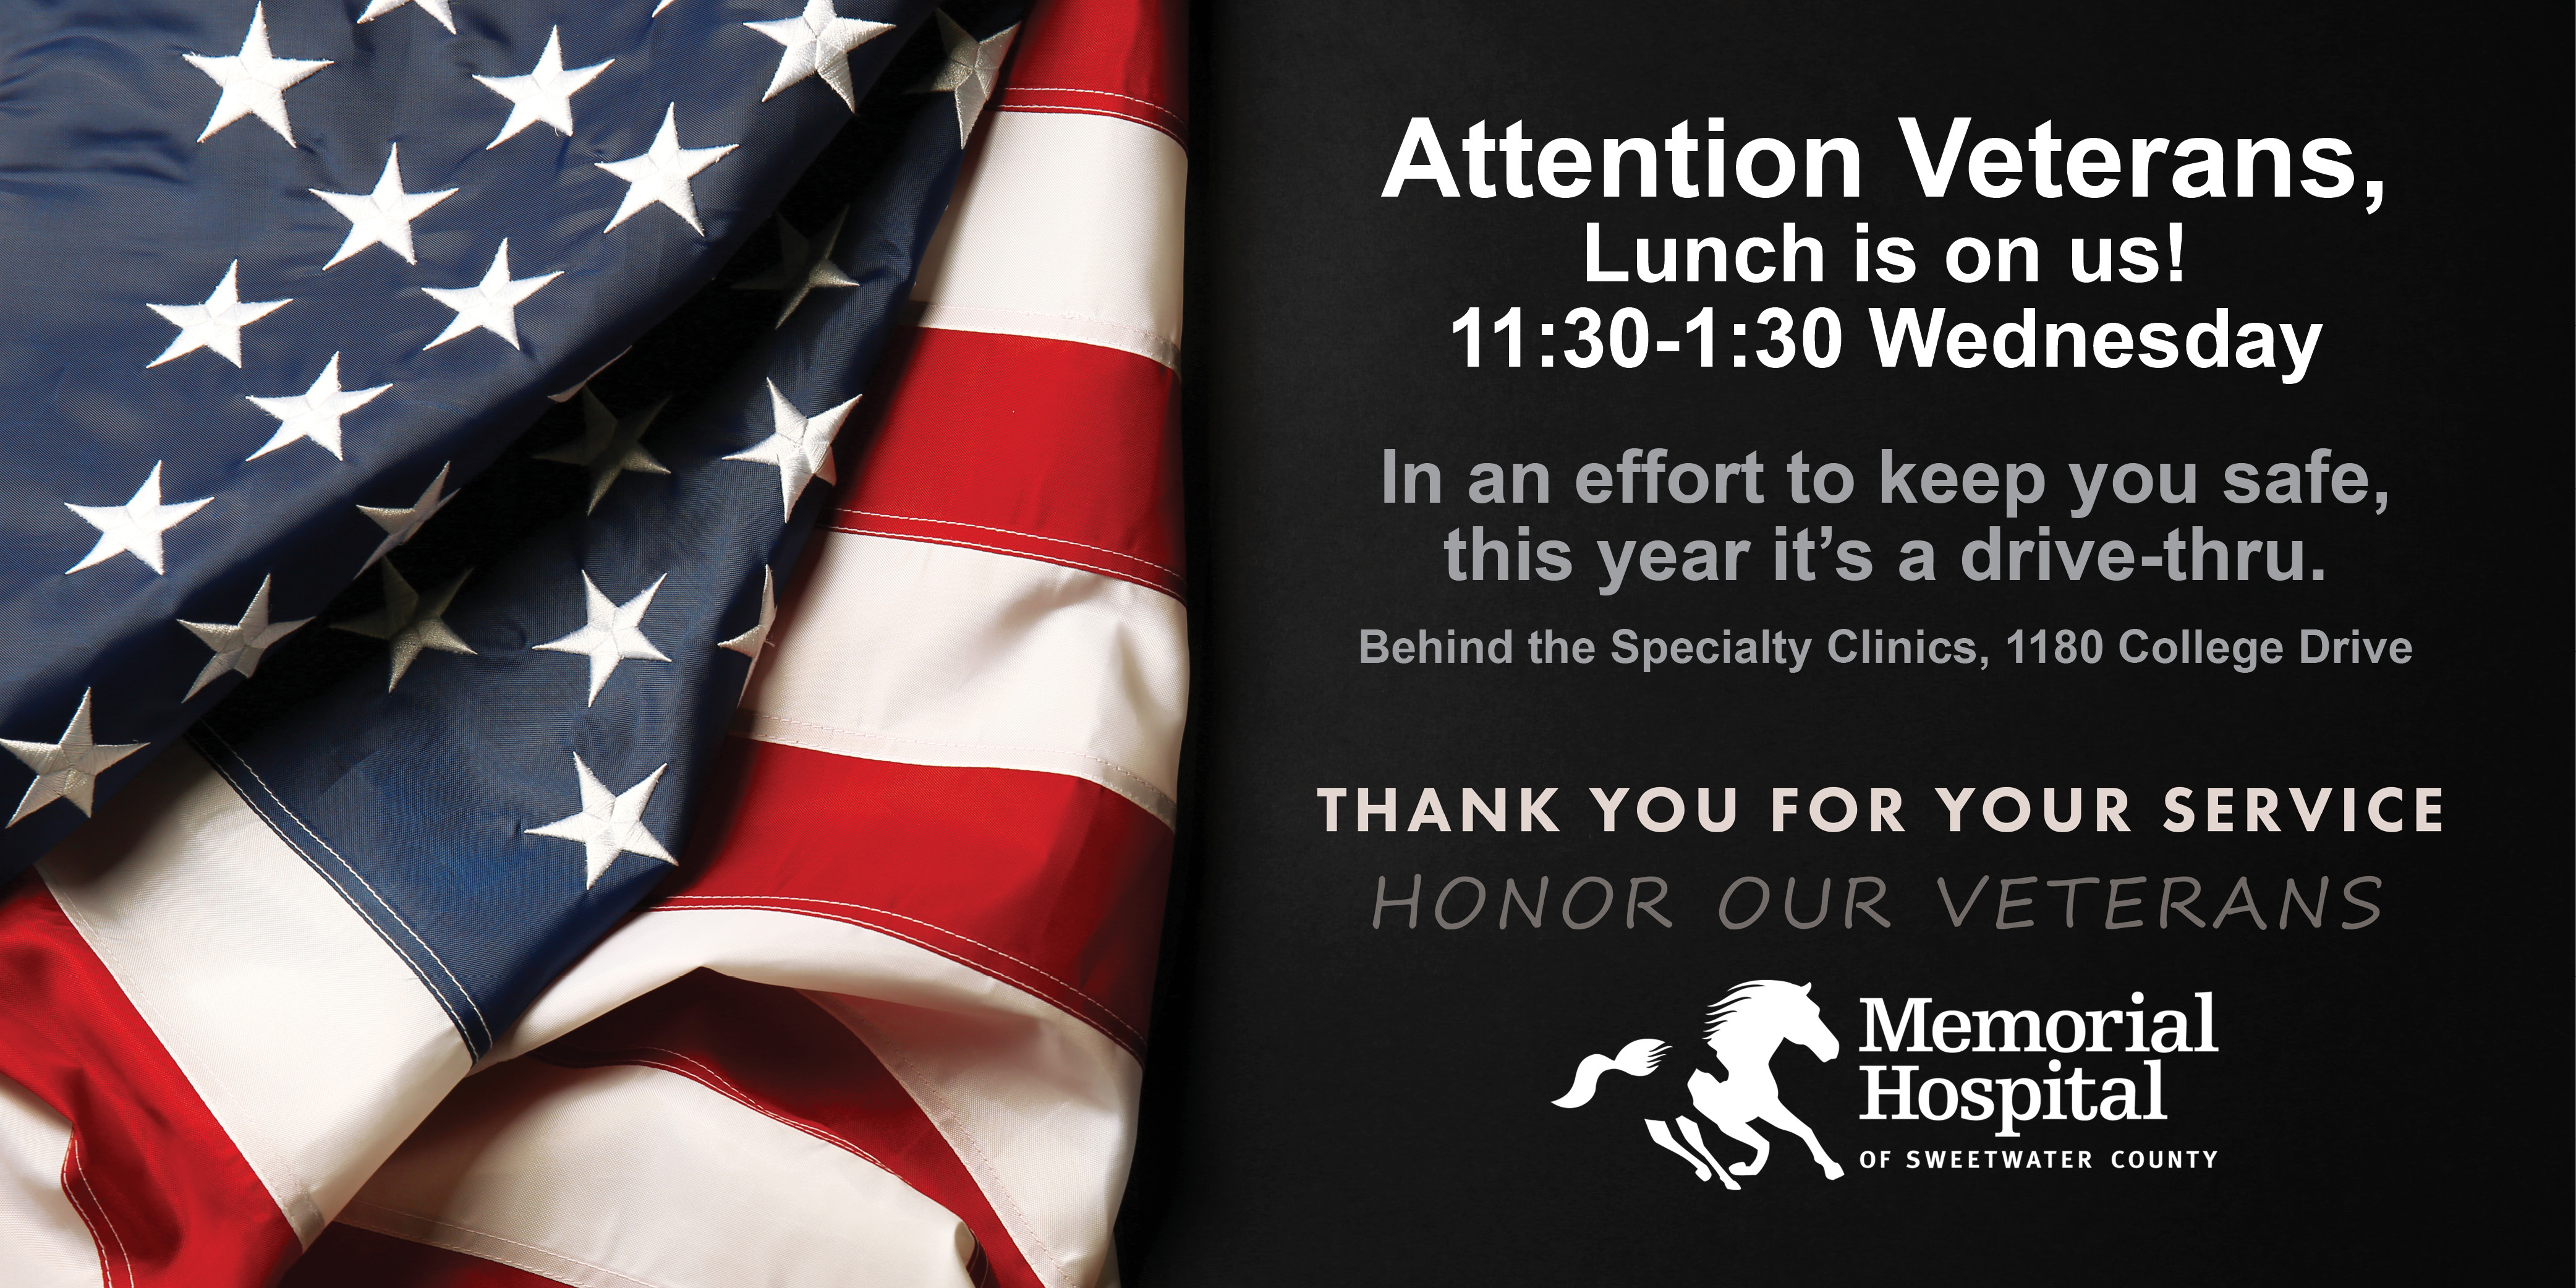 Lunch is on Sweetwater Memorial Hospital this Veterans Day